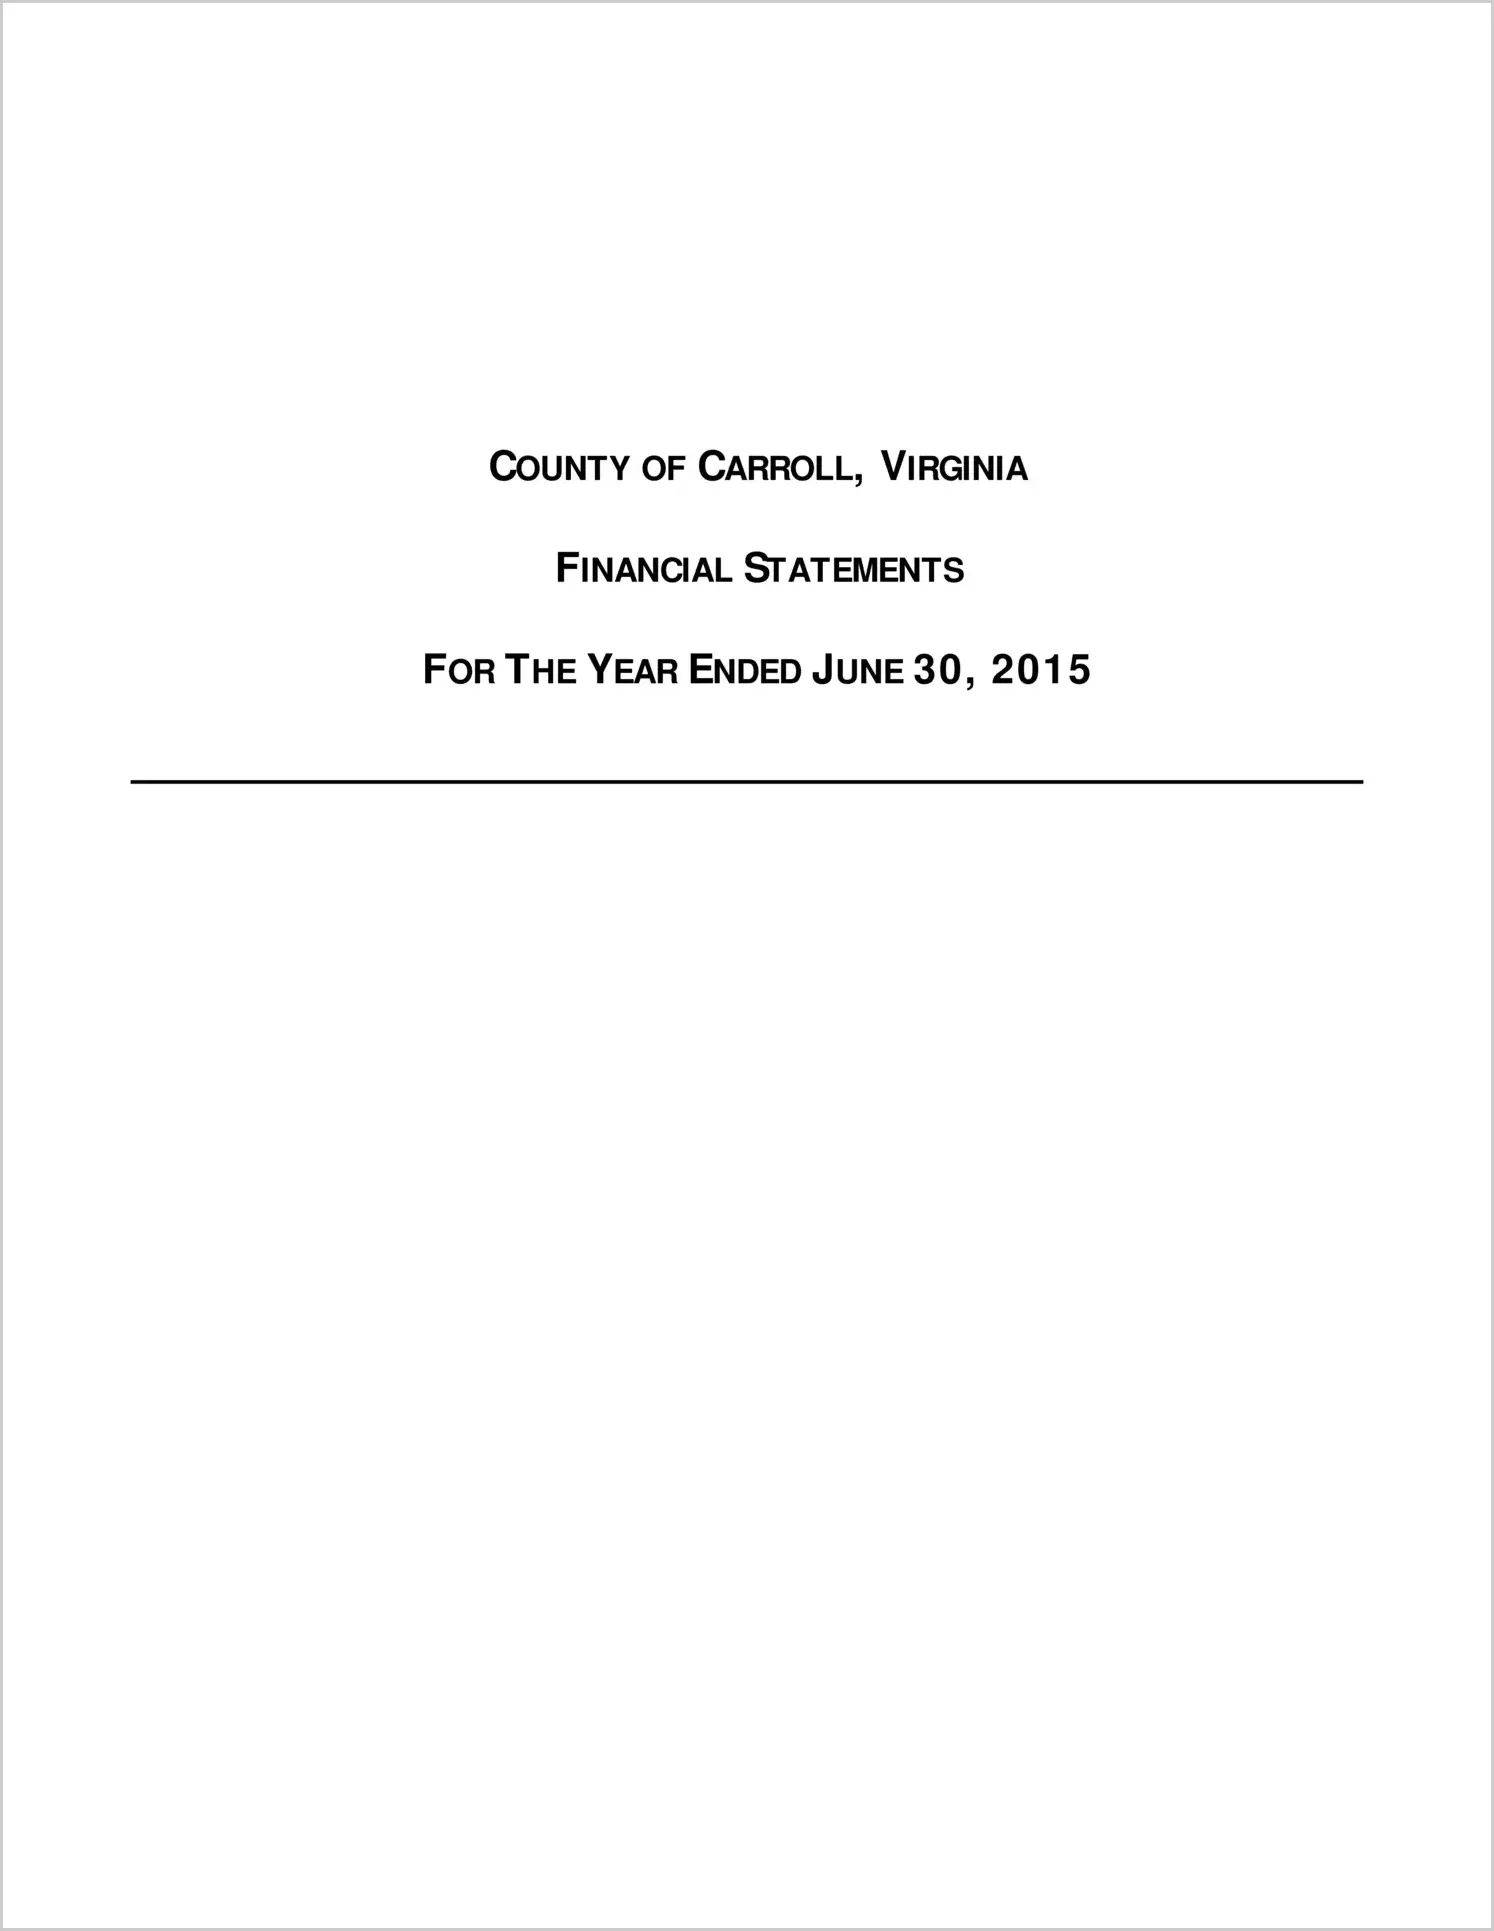 2015 Annual Financial Report for County of Carroll